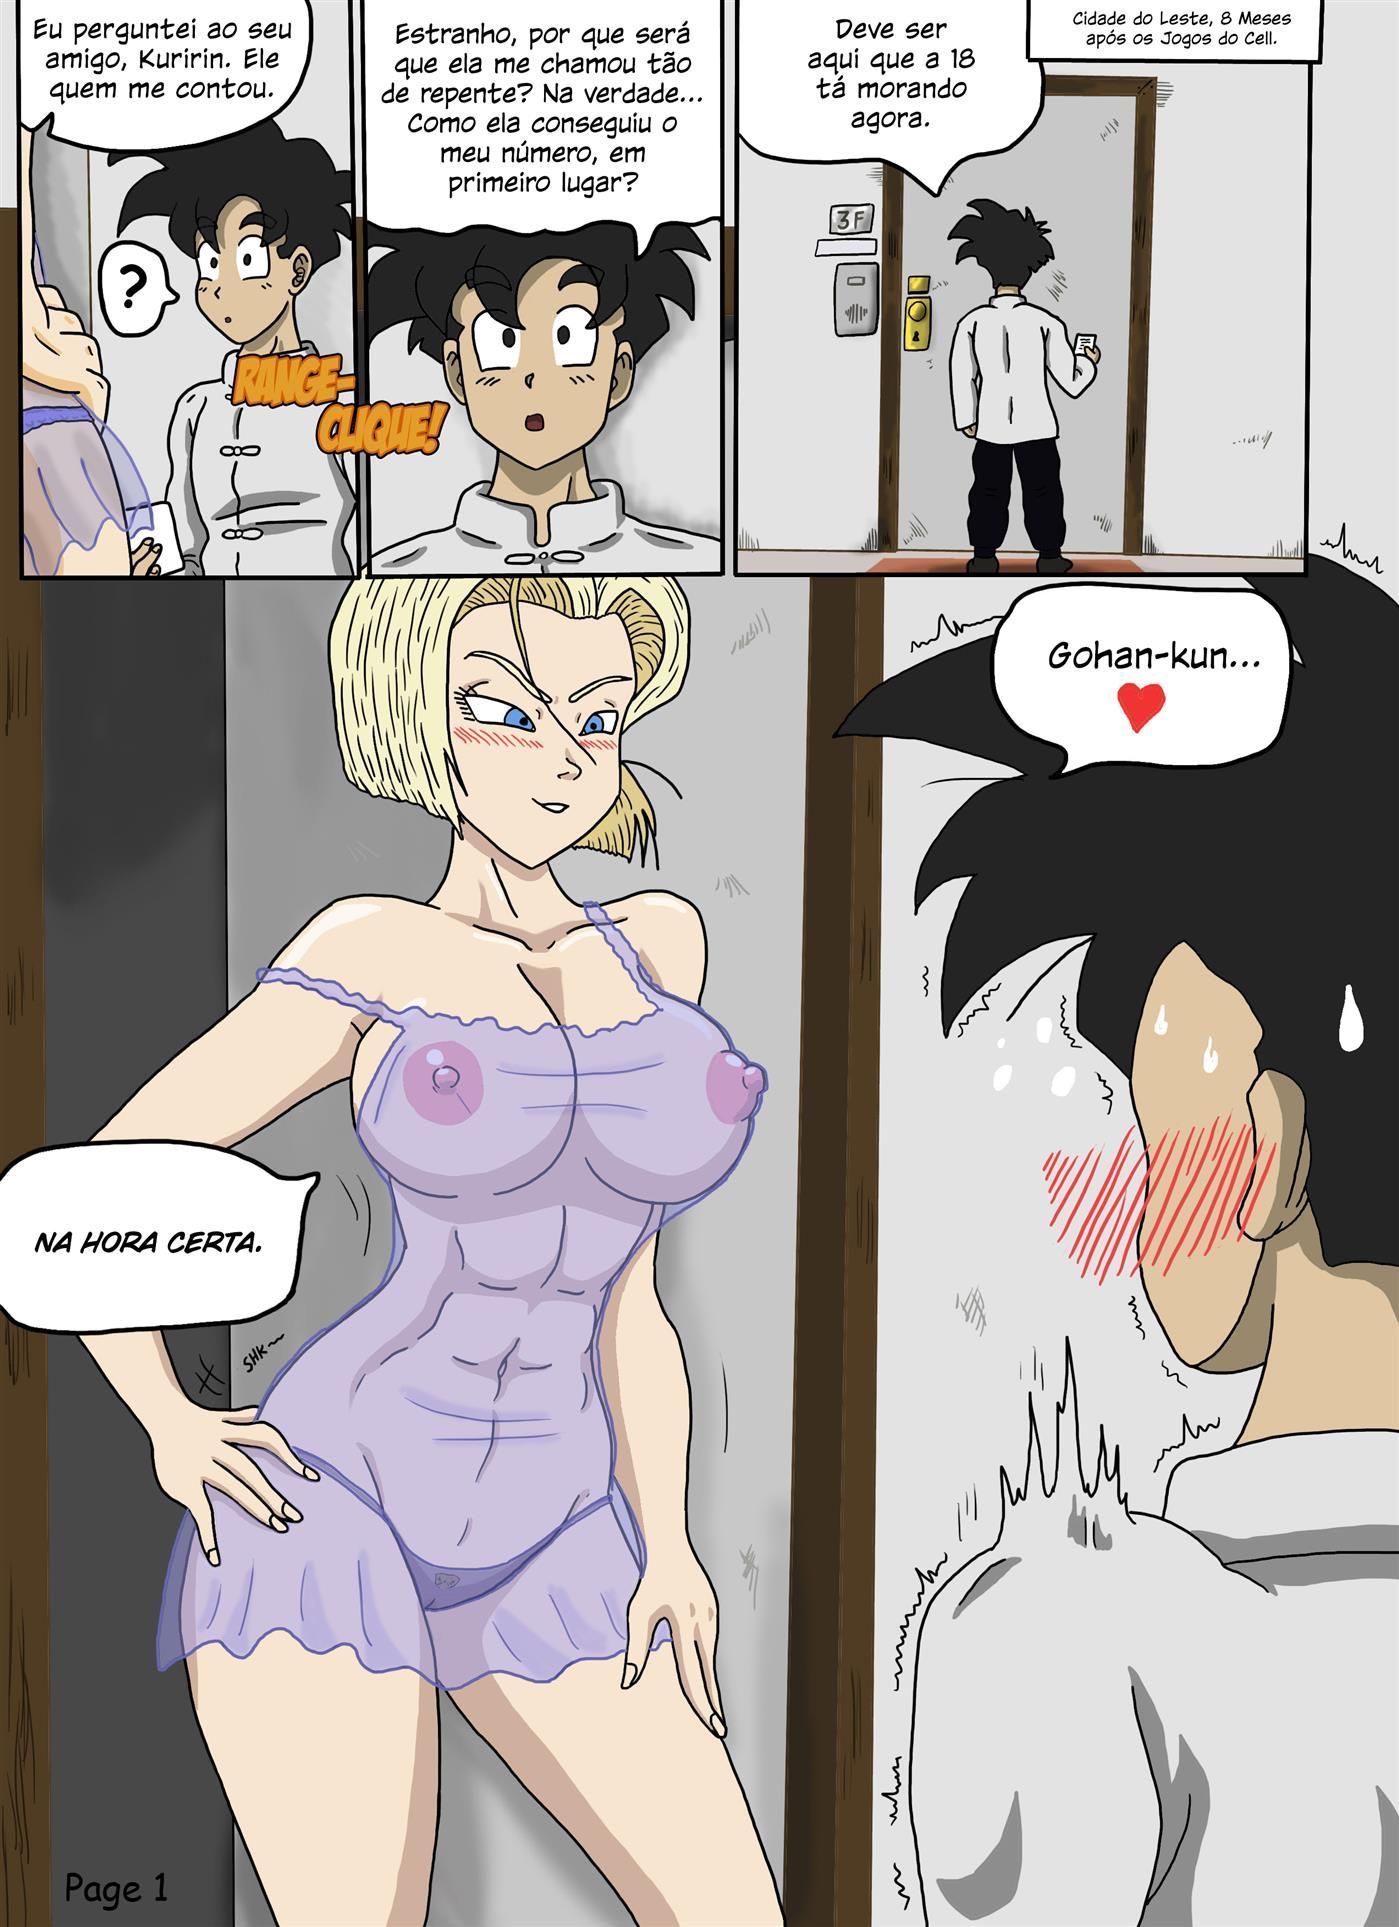 Gohan Best Years: Android 18